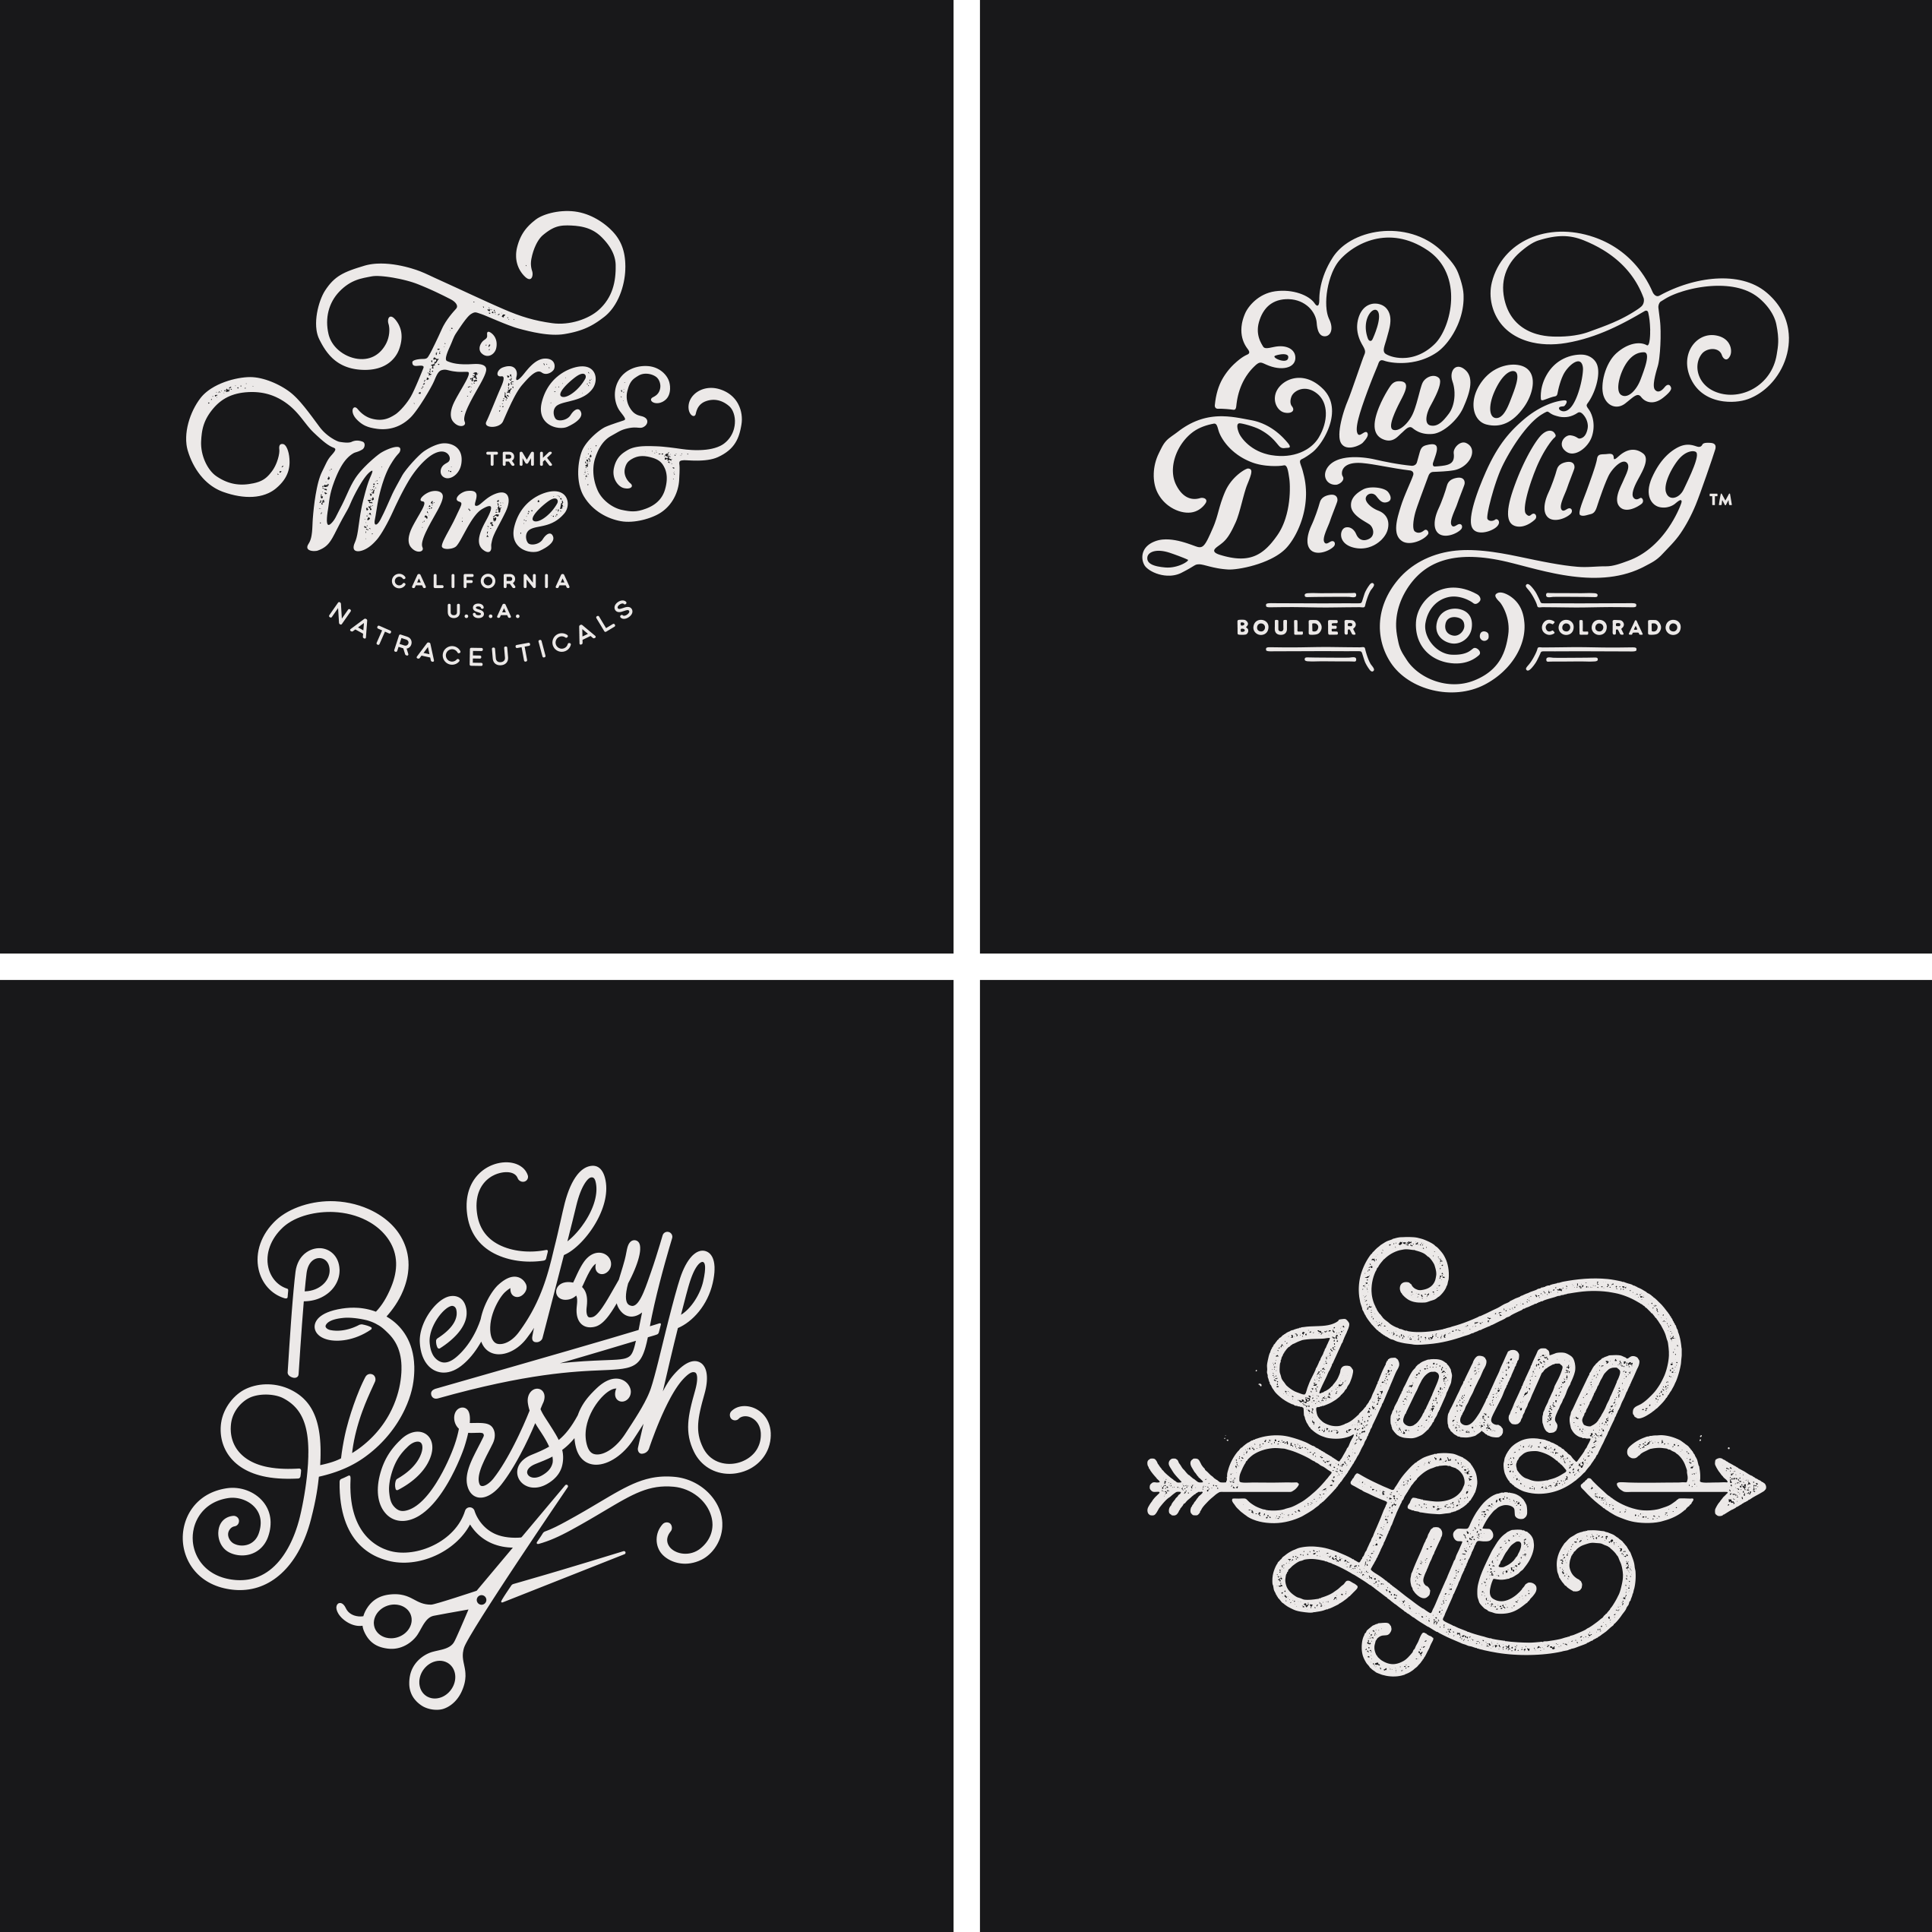 Logos by Sunday Lounge : Fire and Wine Logo - Elwood Distilling Logo - Becky Hersch Logo - Young Life Logo